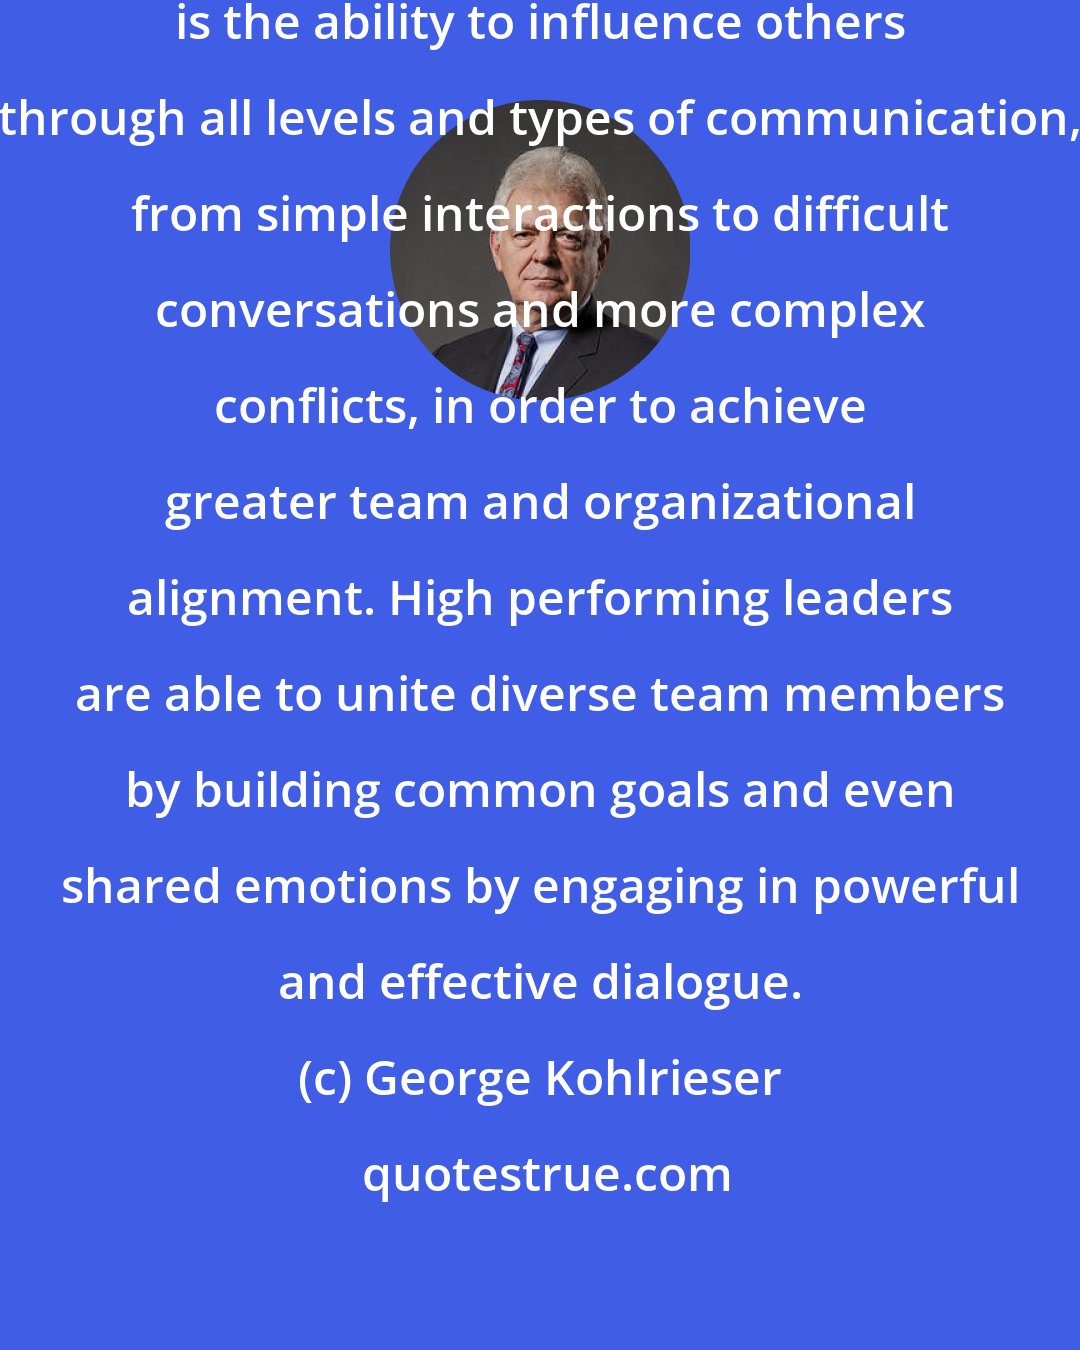 George Kohlrieser: A hallmark of high performance leaders is the ability to influence others through all levels and types of communication, from simple interactions to difficult conversations and more complex conflicts, in order to achieve greater team and organizational alignment. High performing leaders are able to unite diverse team members by building common goals and even shared emotions by engaging in powerful and effective dialogue.